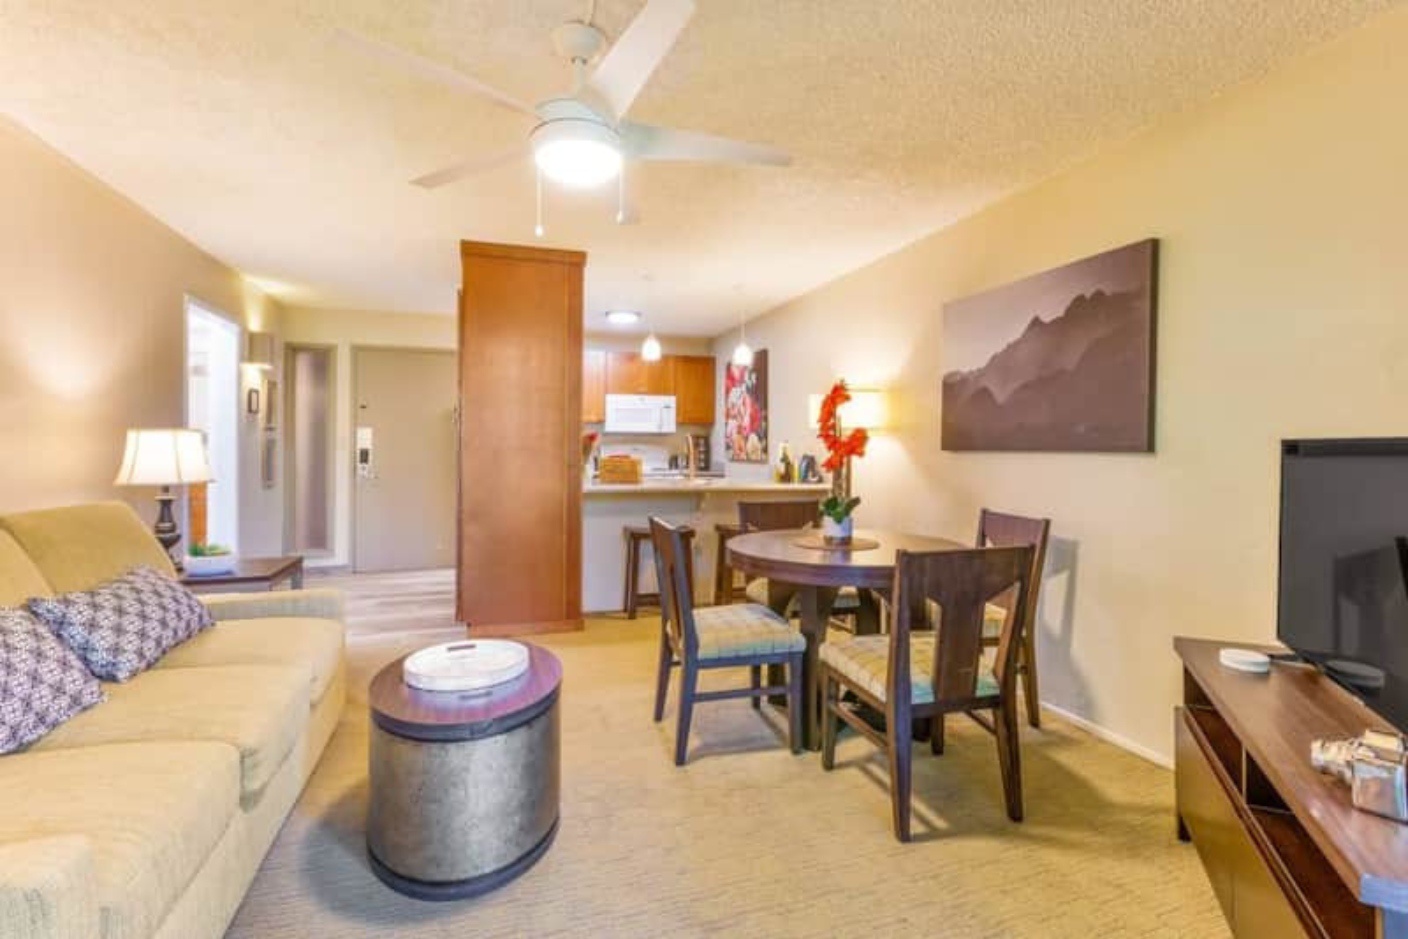 Kapaa Vacation Rentals, Kahaki Hale - Fully open floor plan connects all the living spaces